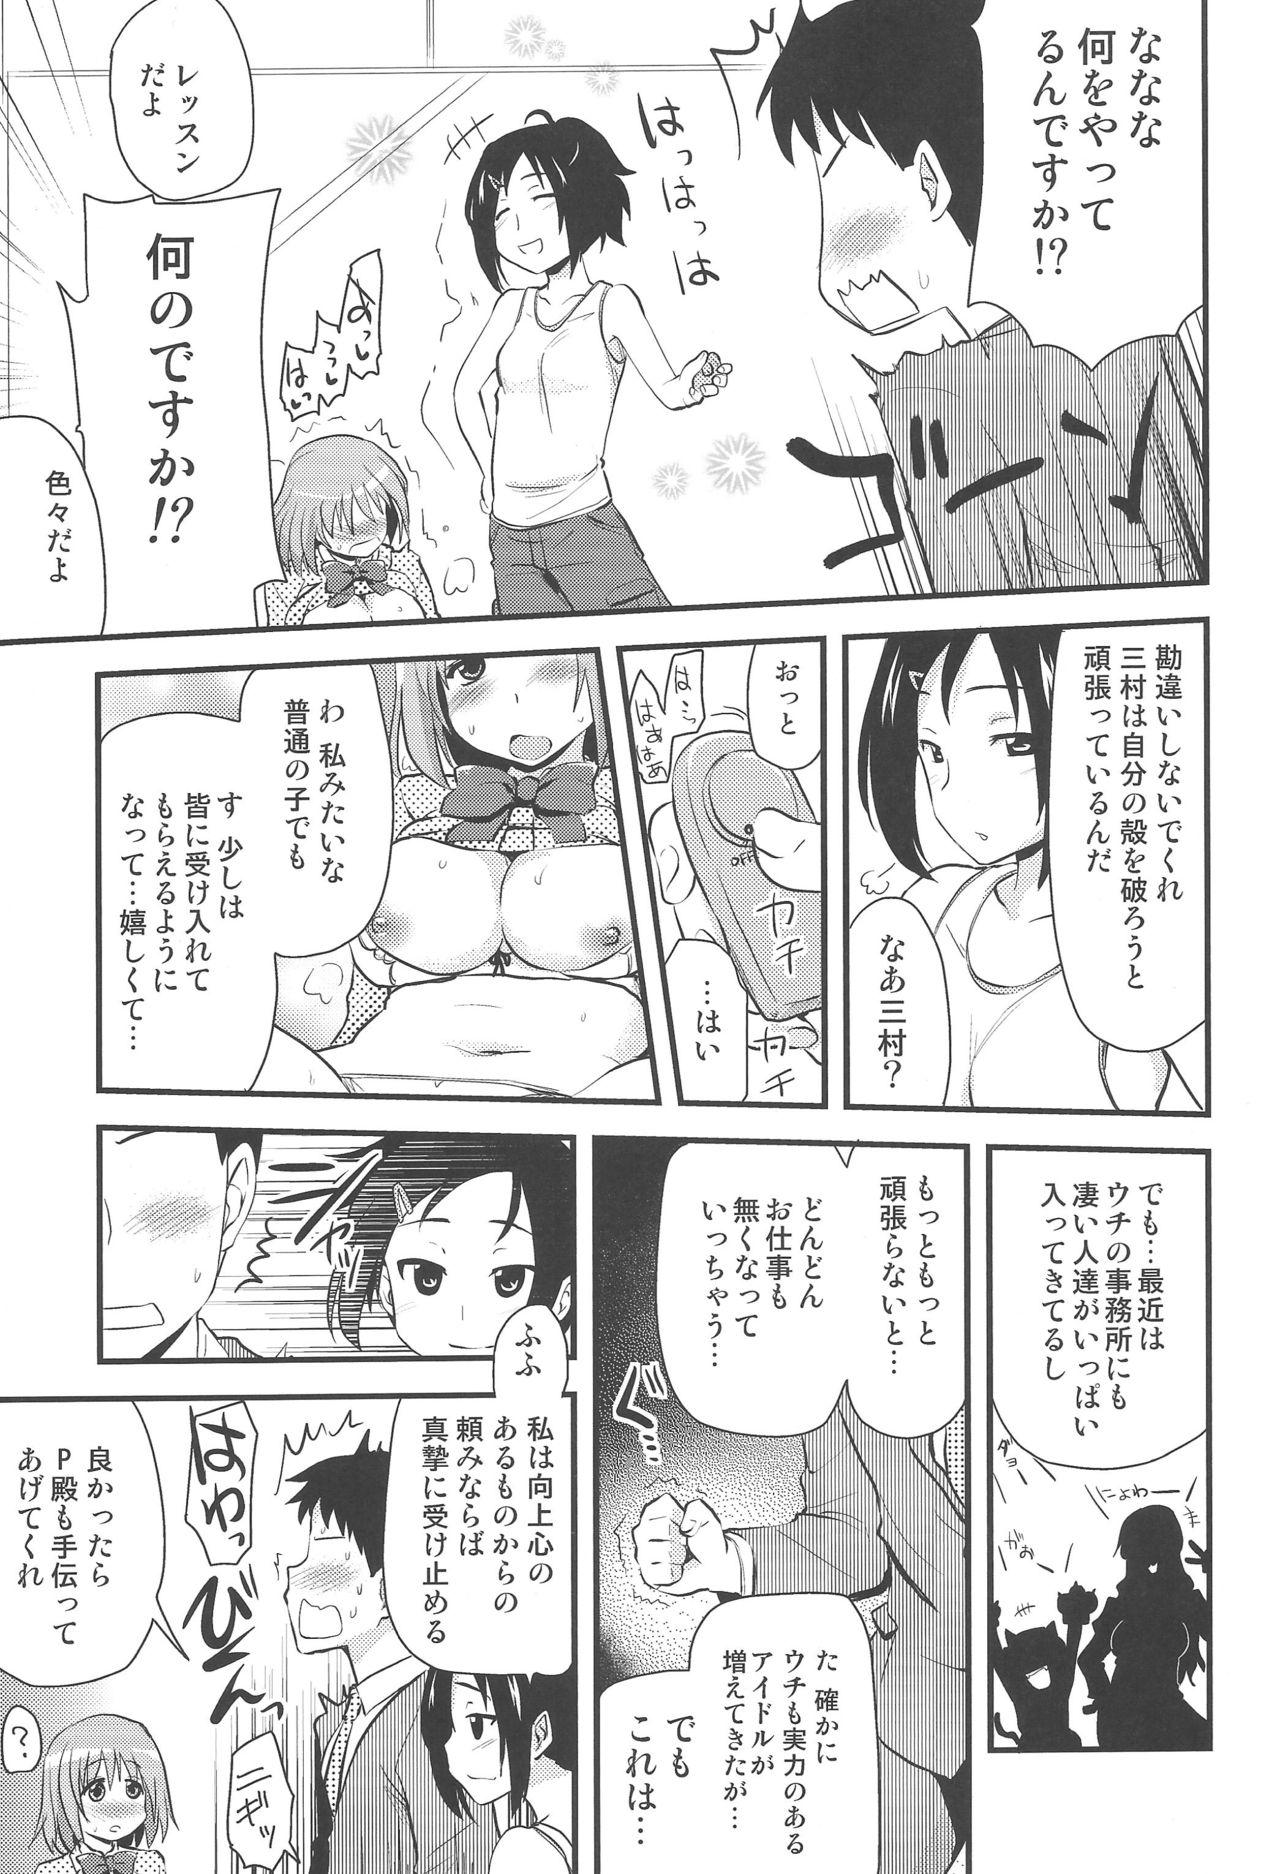 Best Blowjobs Icha Love! - The idolmaster Animation - Page 6